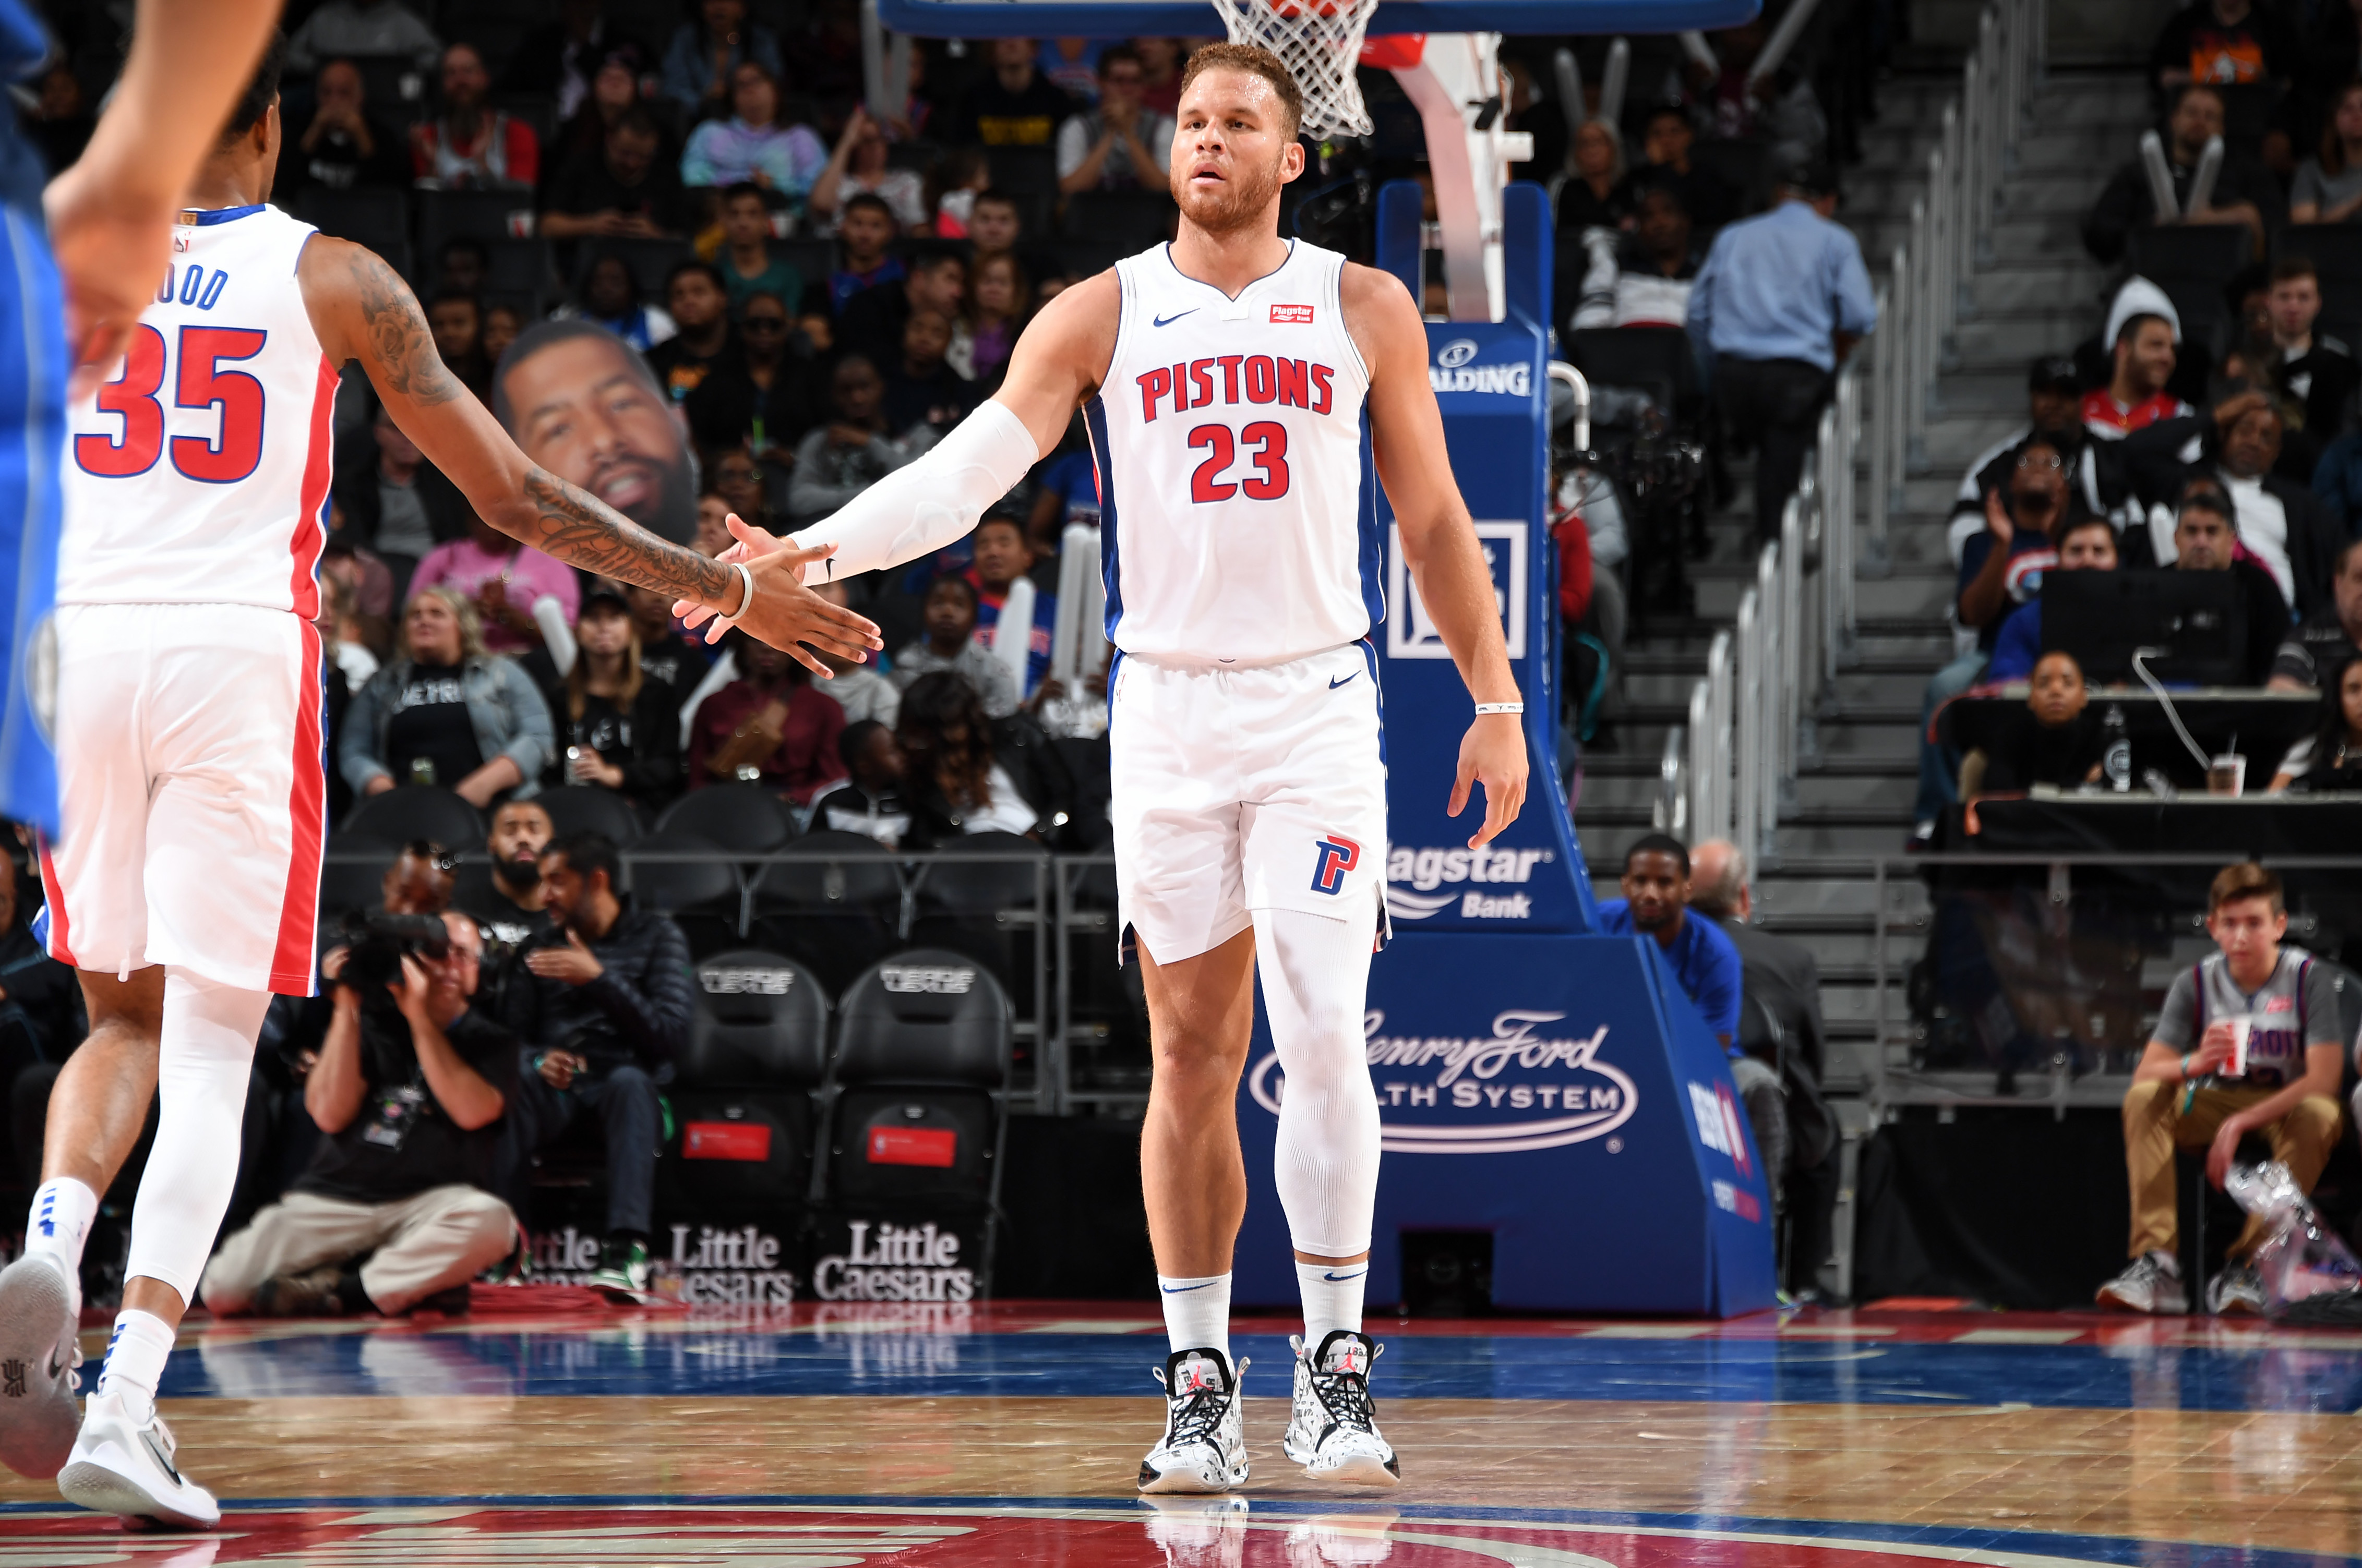 Here's why the Lakers probably should not sign Blake Griffin - Los